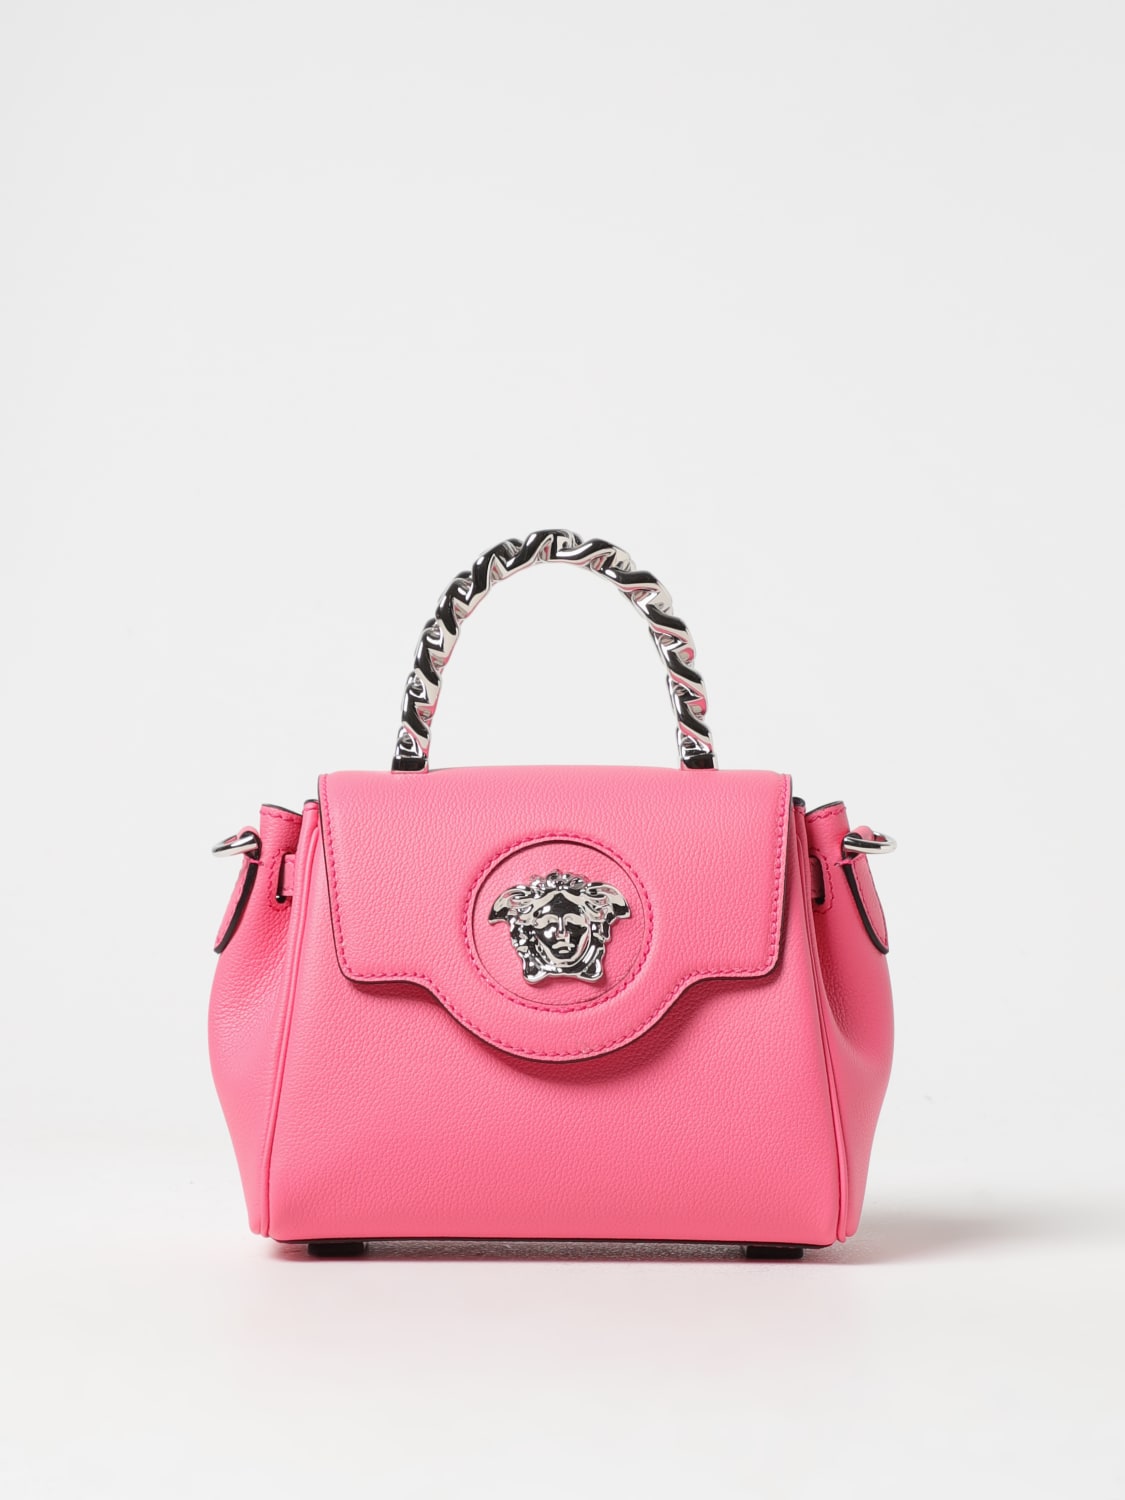 Versace Medusa Grained Leather Bag in Pink